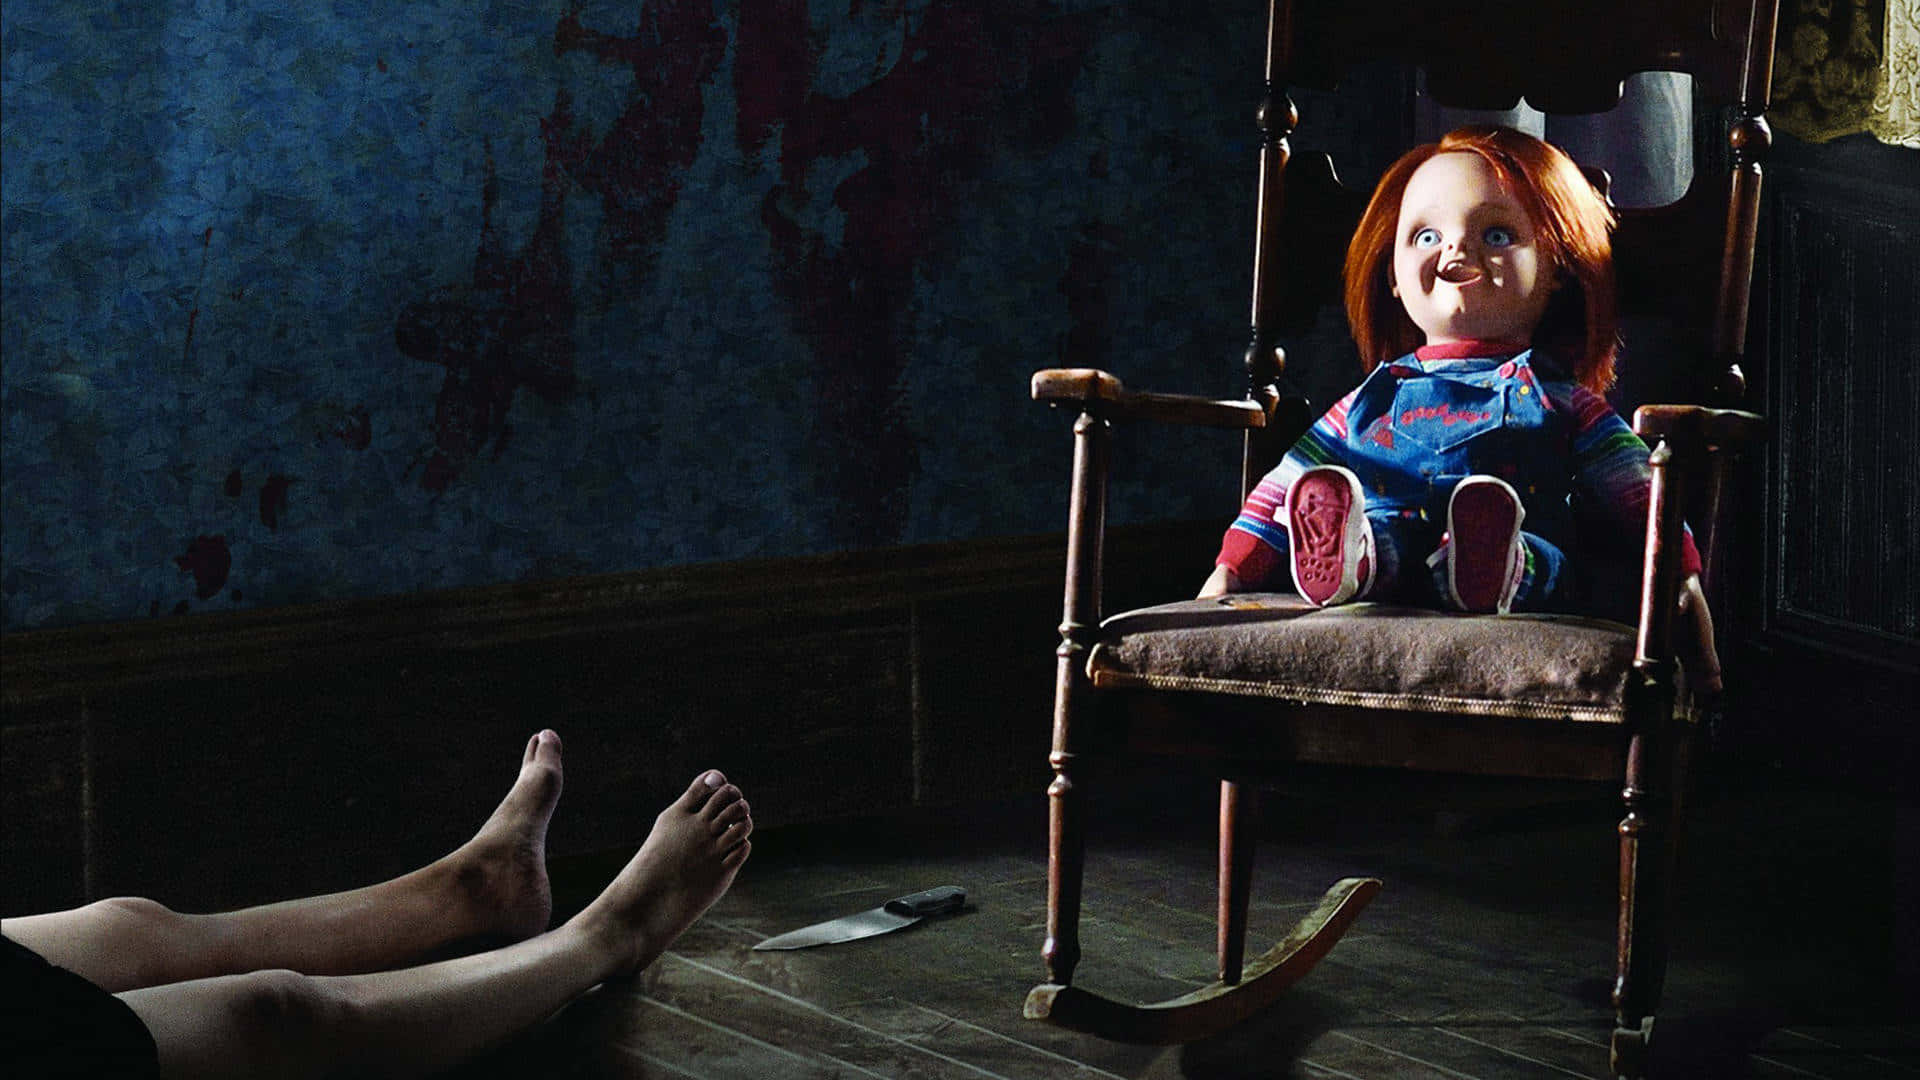 Chucky Doll On A Rocking Chair Wallpaper